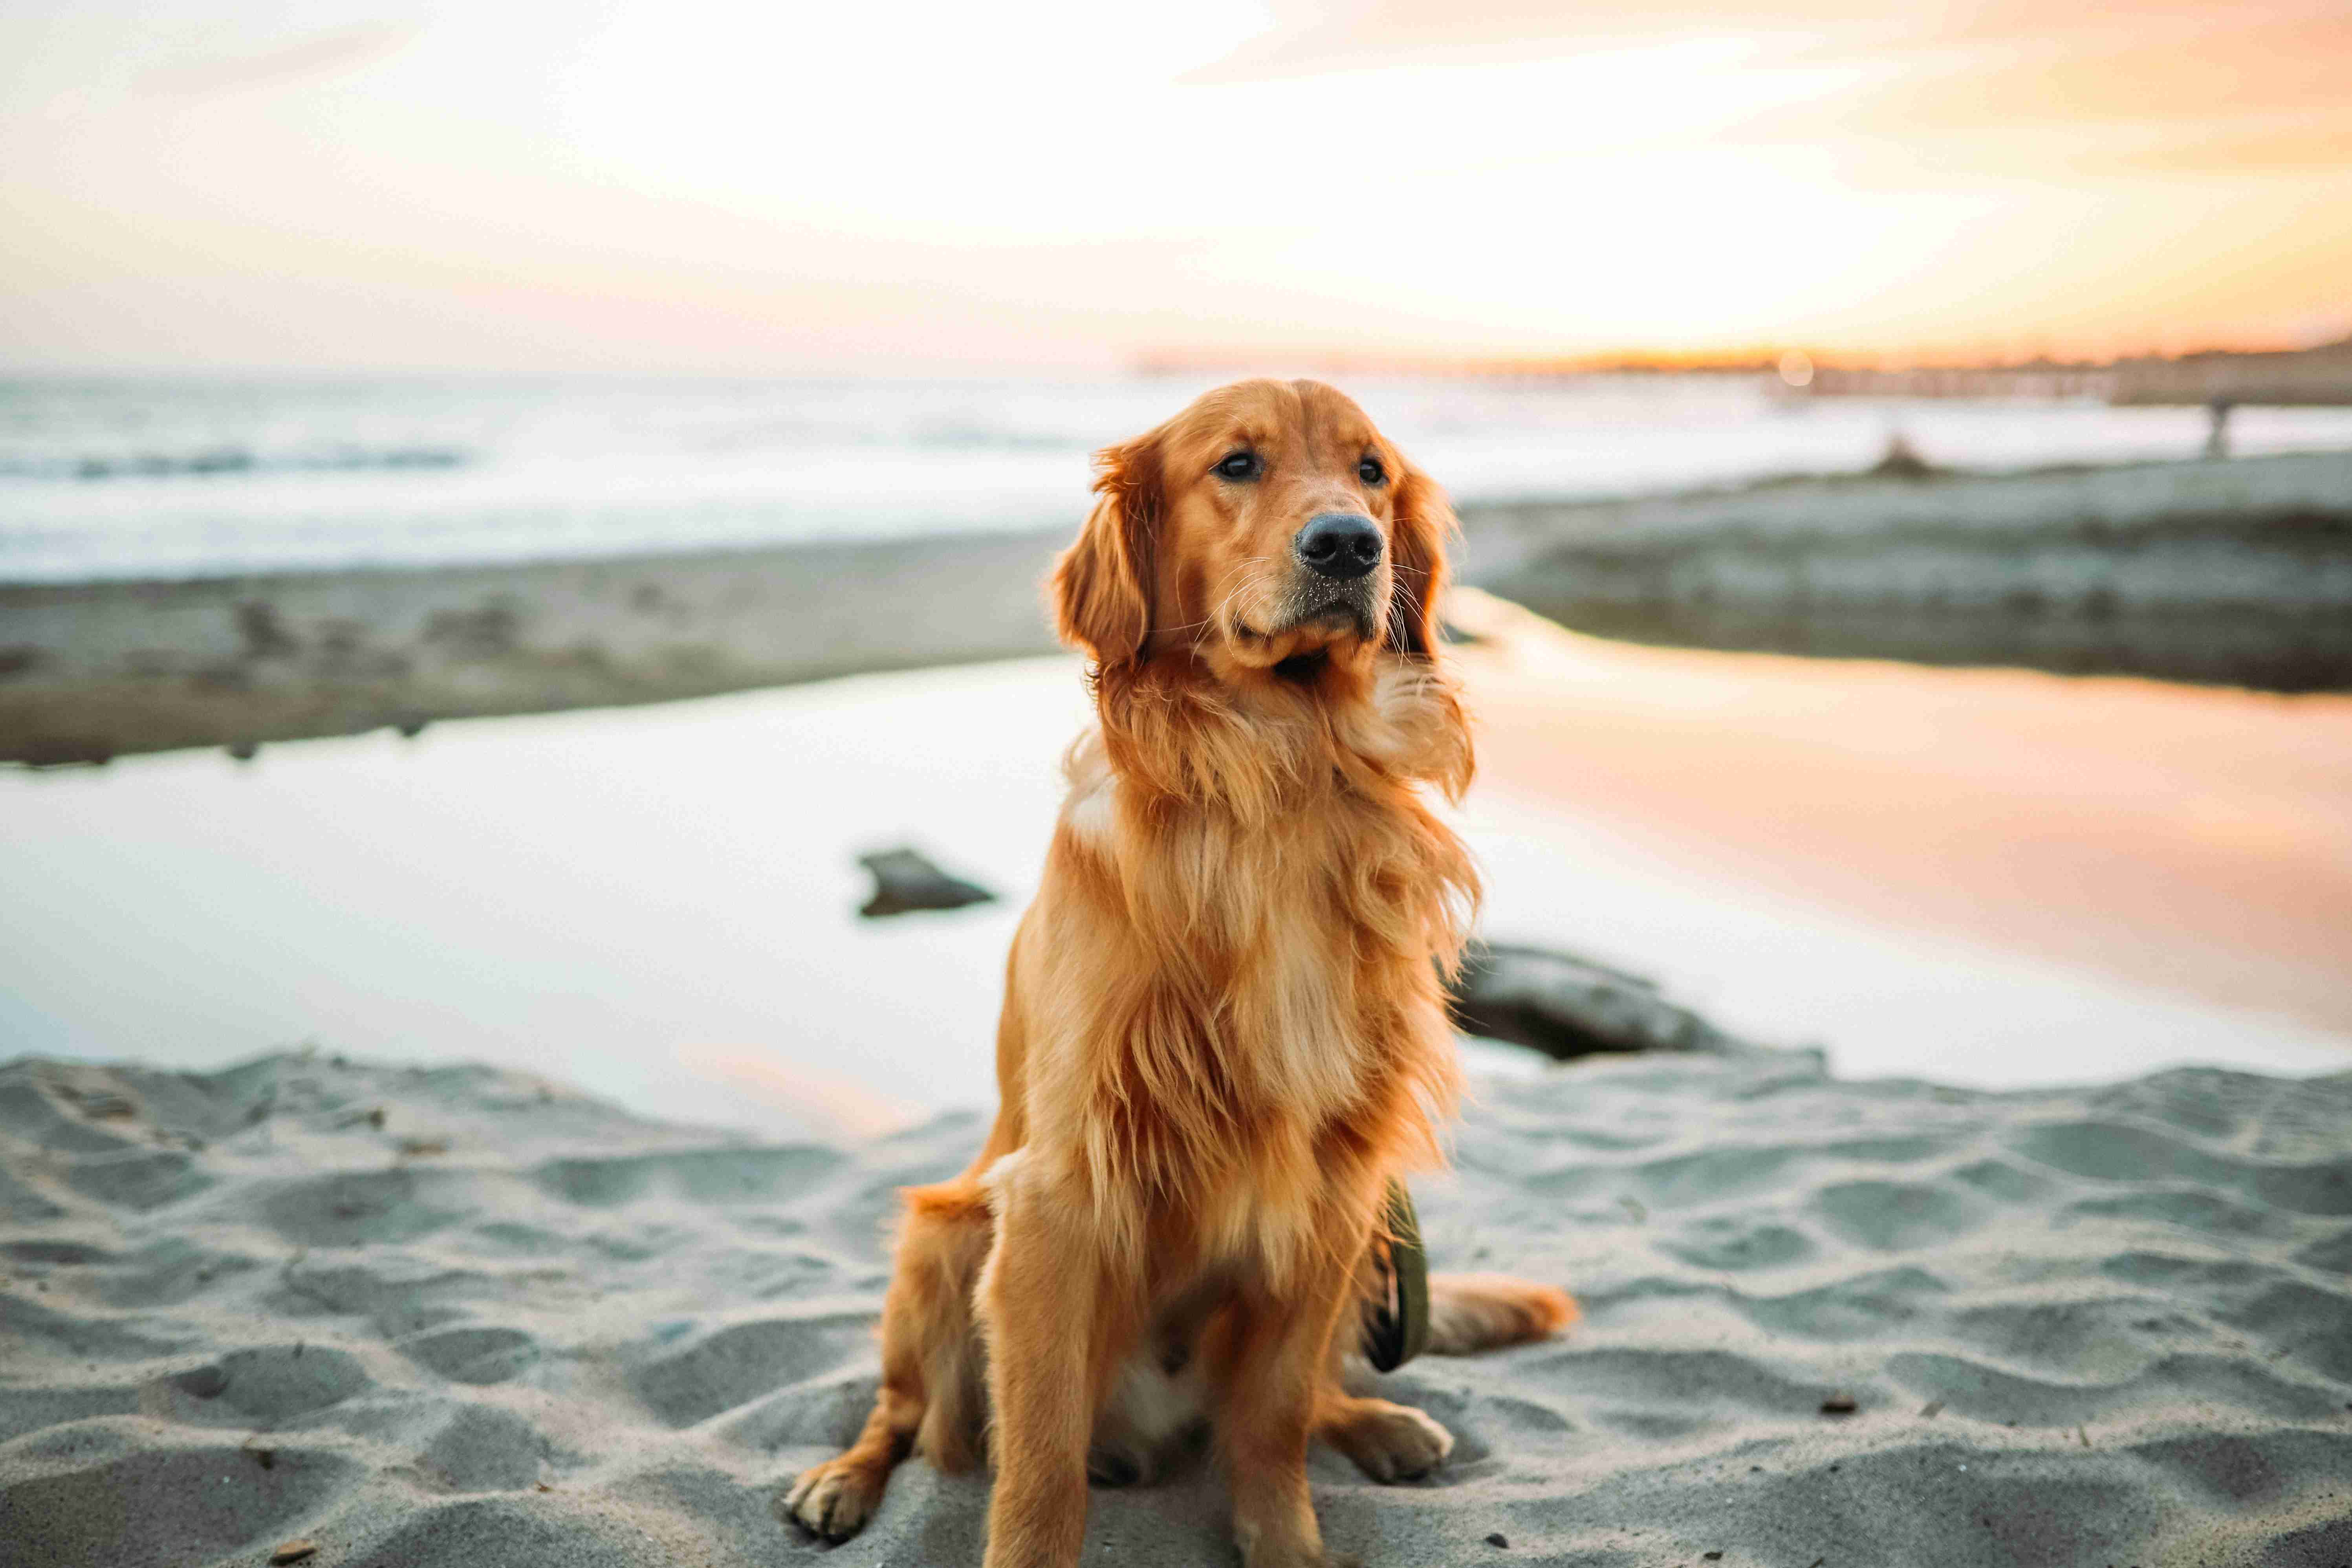 What are some signs of gastrointestinal problems in Golden Retrievers?